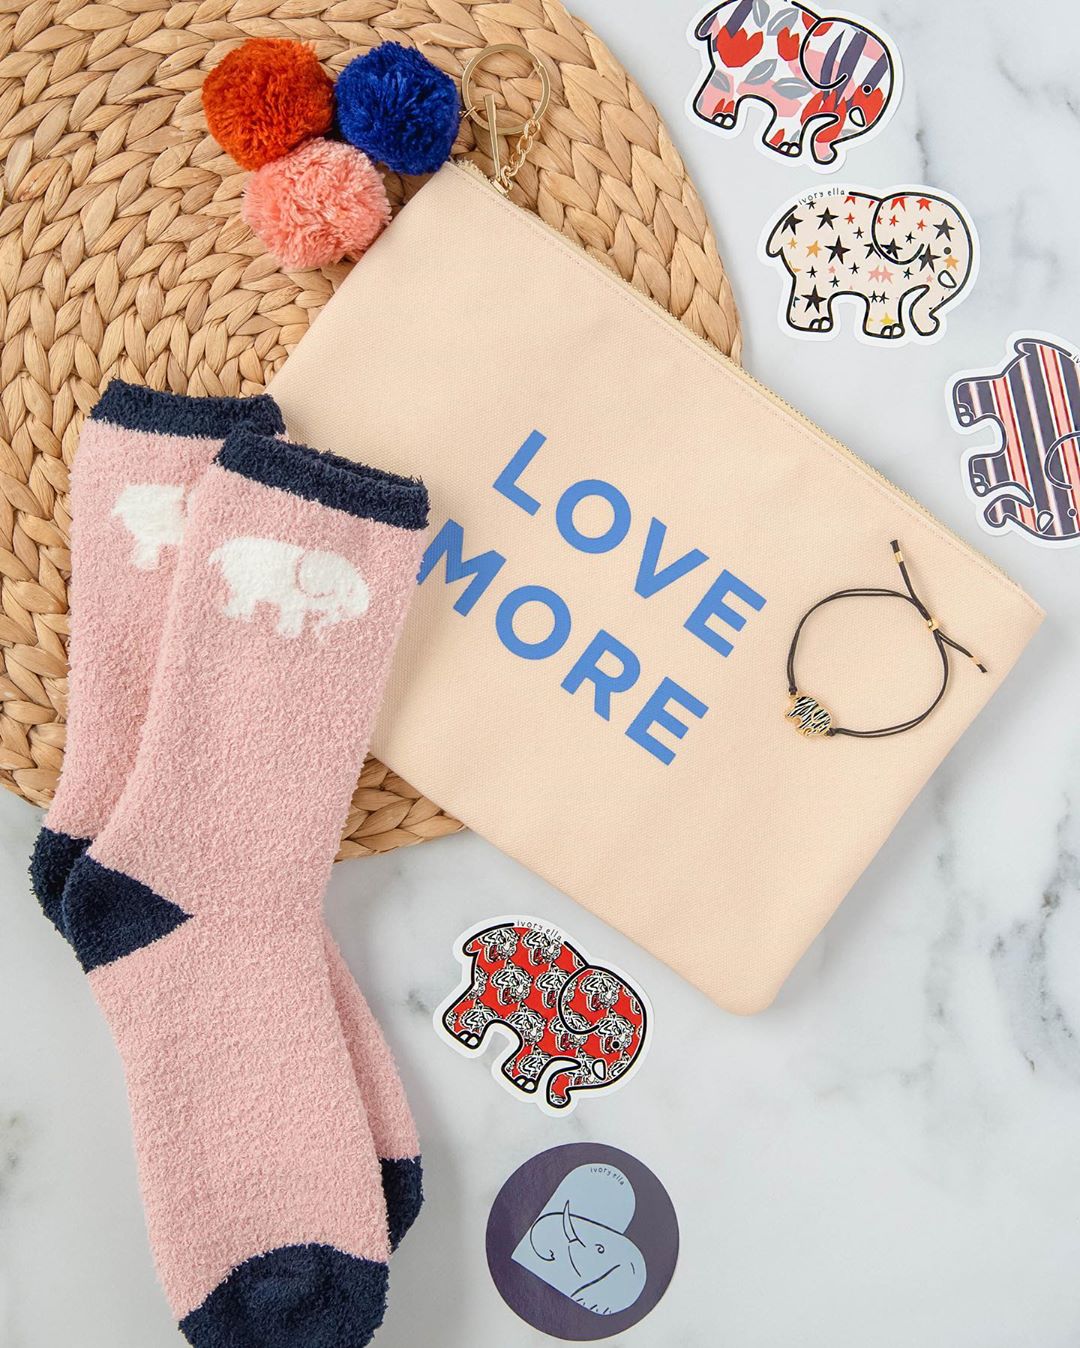 Ivory Ella - We know you love a good pair of fuzzy socks 🤗 The best part? They come with our September Accessory Surprise Box AND they help #SaveTheElephants 🐘 Shop Surprise Boxes above!